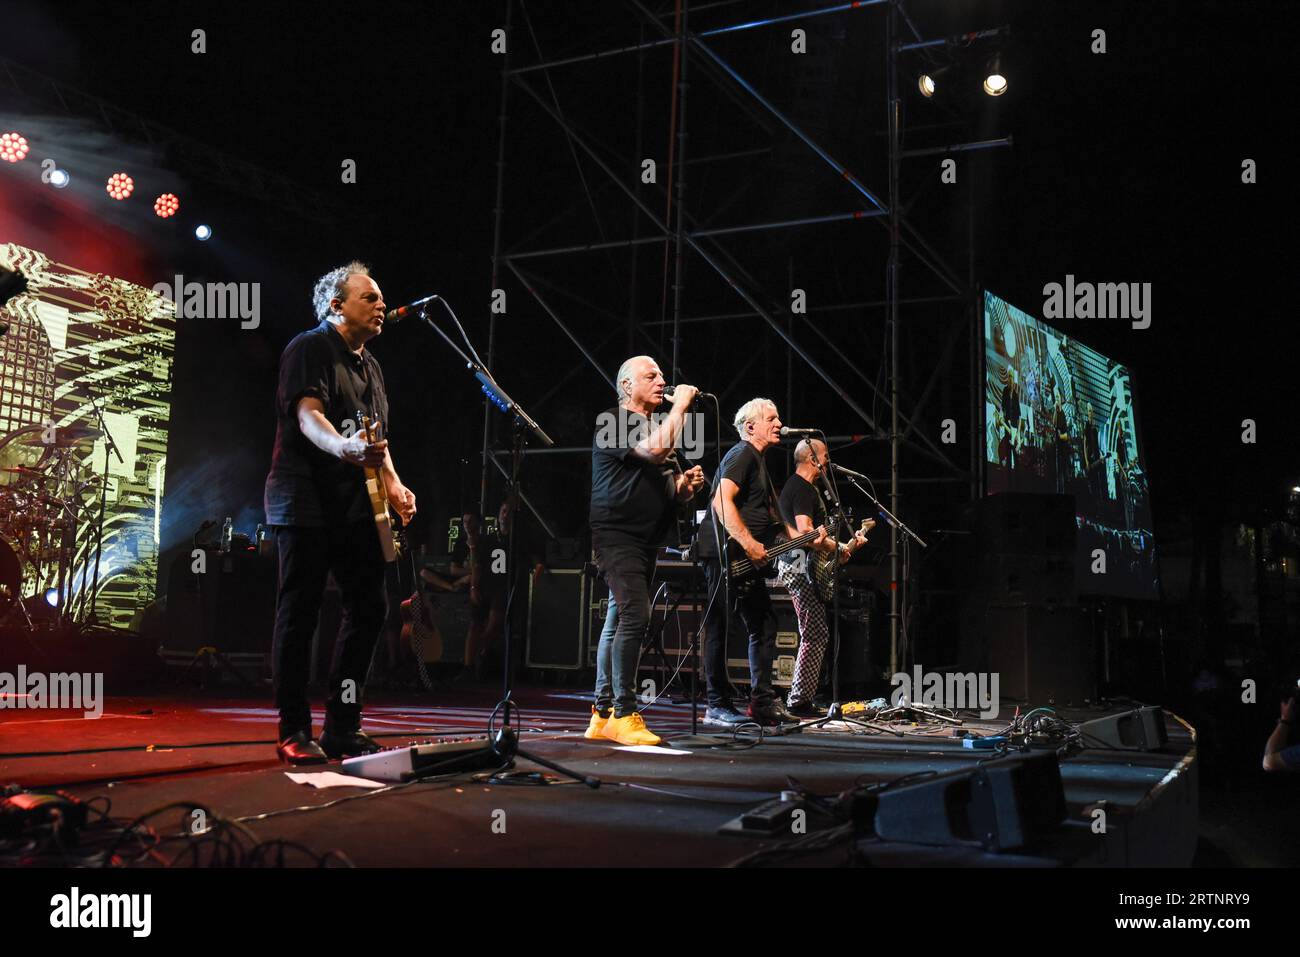 T-slam Band live on stage at Ramat Hasharon, Israel August 24, 2023 T-Slam (also Tislam, Hebrew: תיסלם) was an influential Israeli rock band, founded Stock Photo